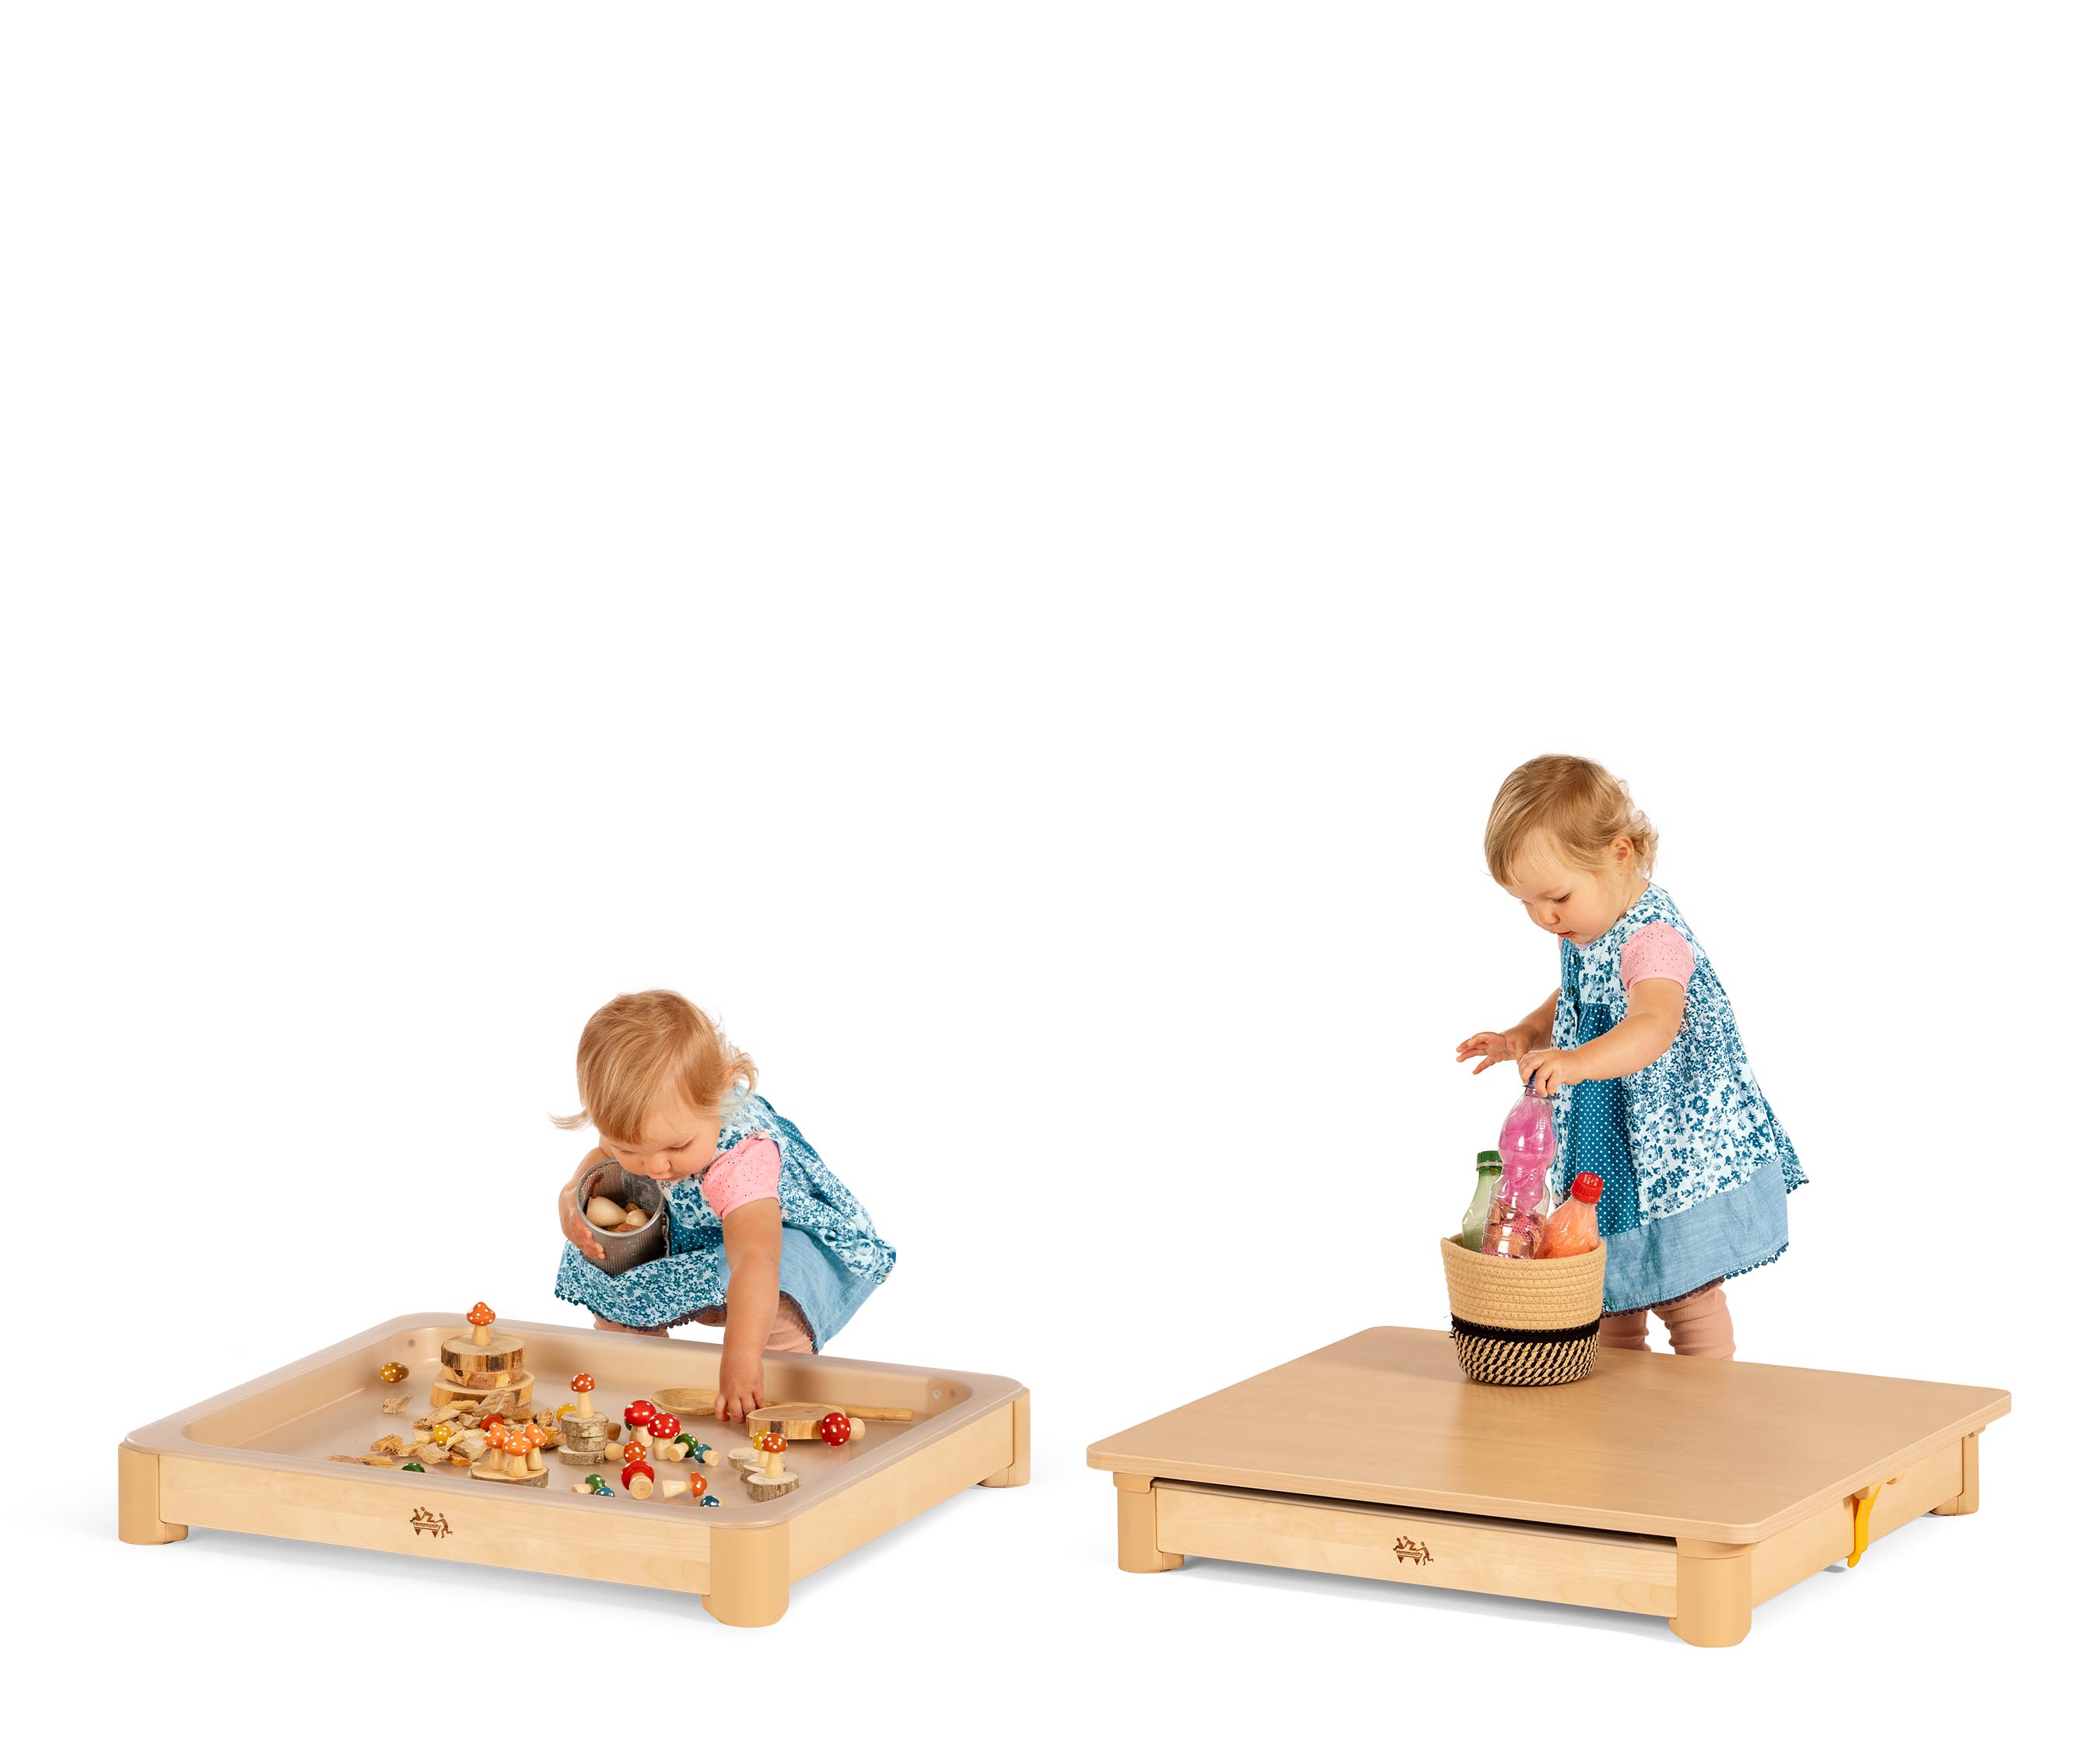 A baby girl in a blue patchwork dress playing with sensory materials in the Activity floor tray.